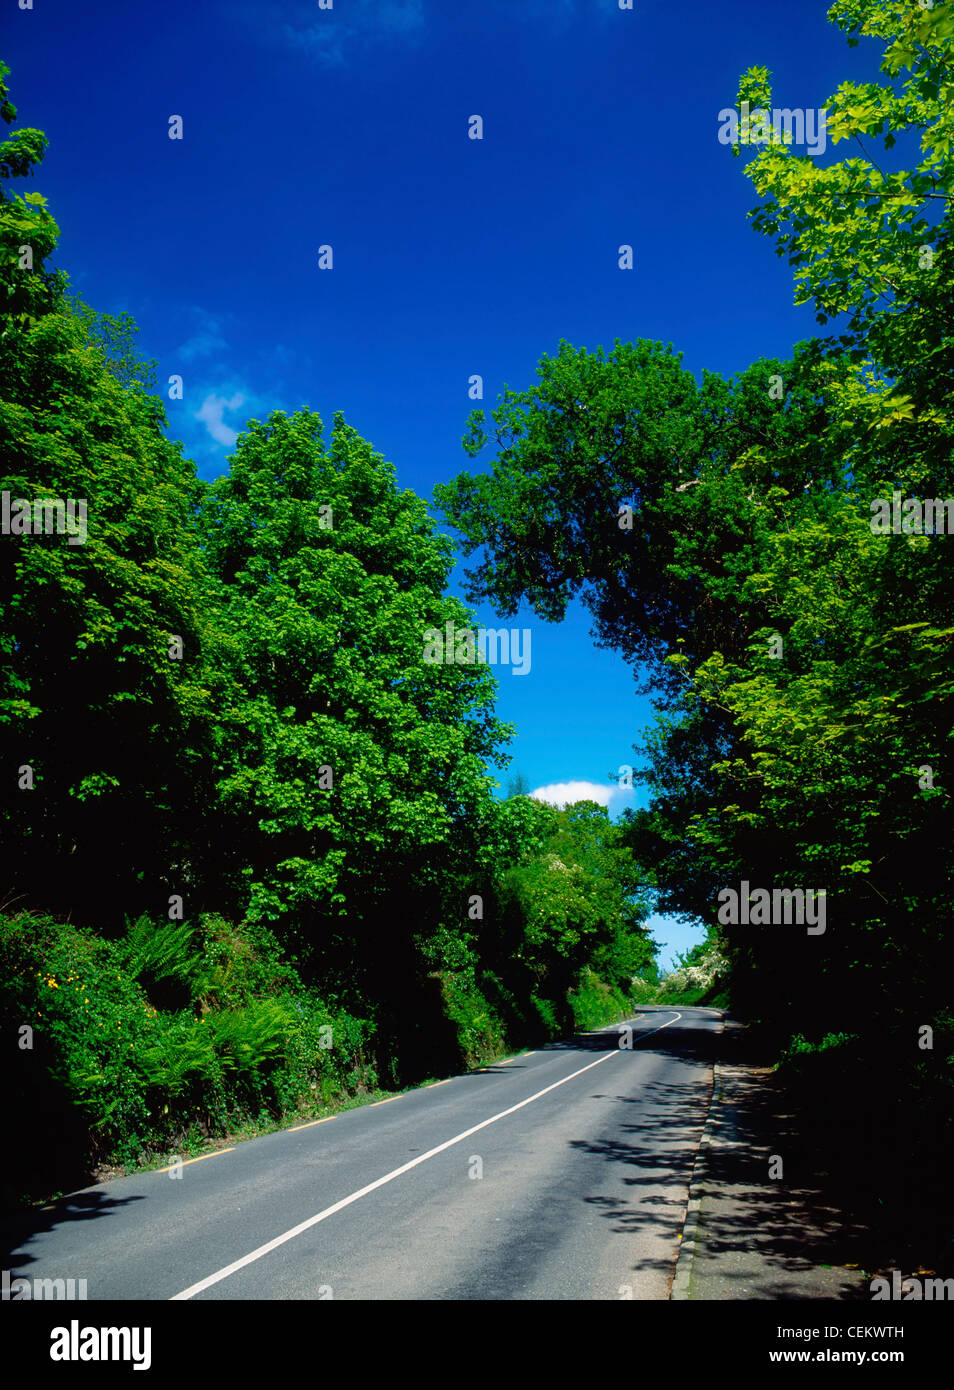 Road In The West Shore, Lough Swilly, Ireland Stock Photo